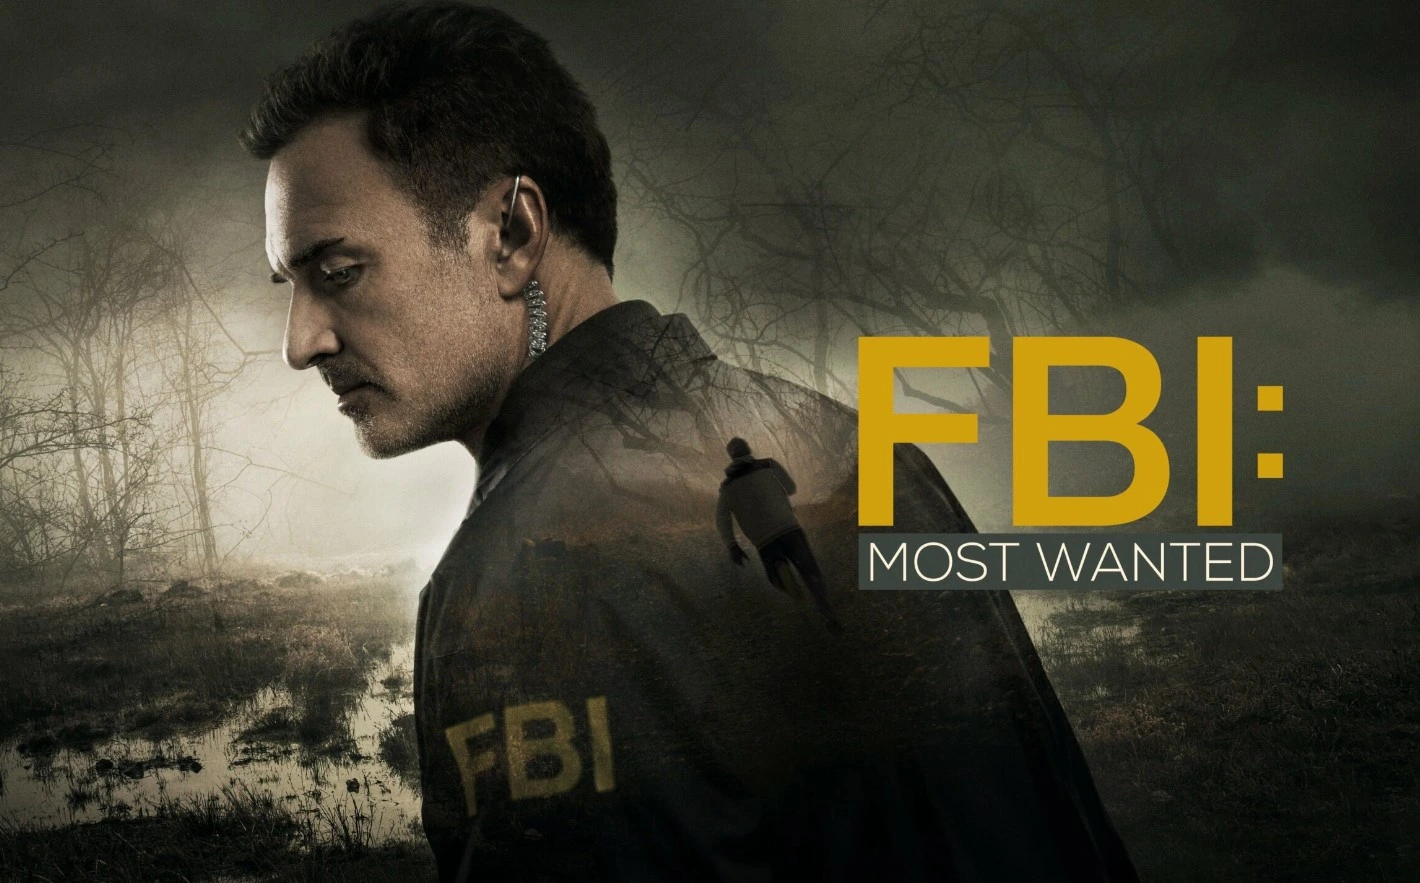 FBI Most Wanted Season 5 Release Date and Watch Online